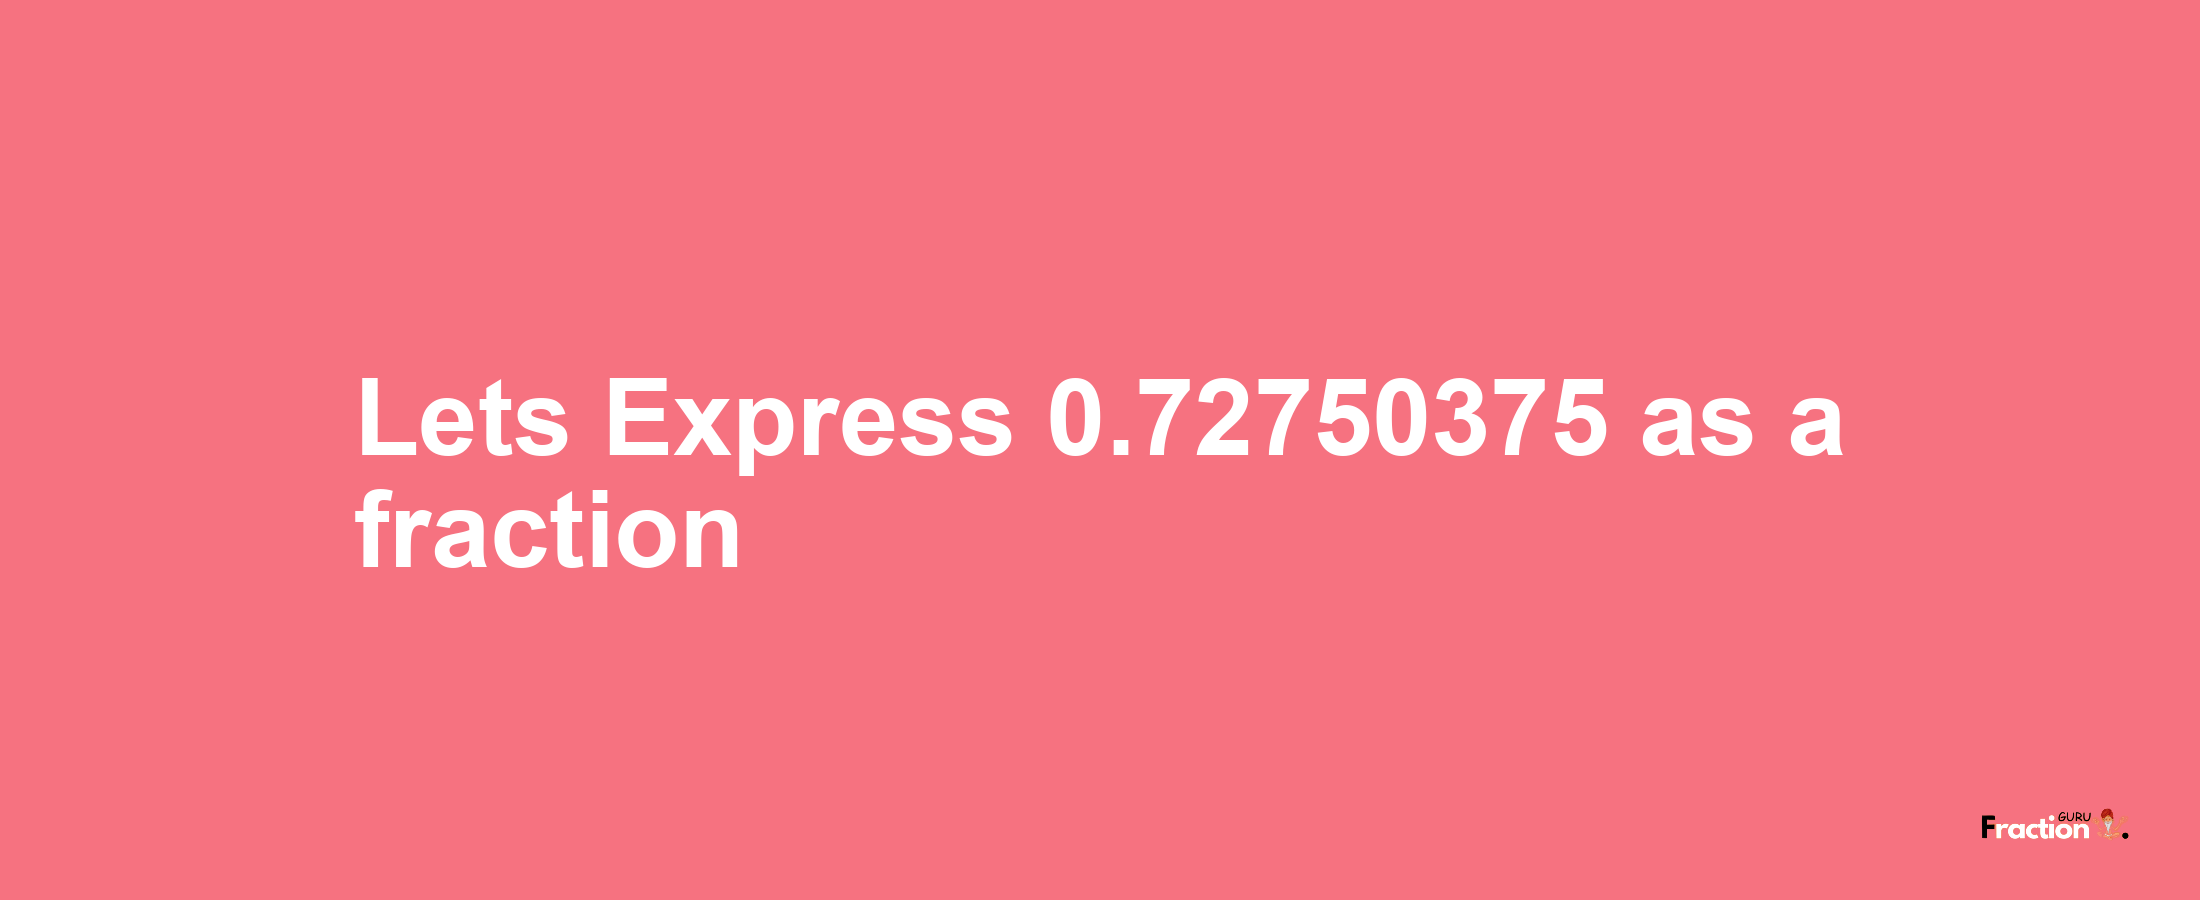 Lets Express 0.72750375 as afraction